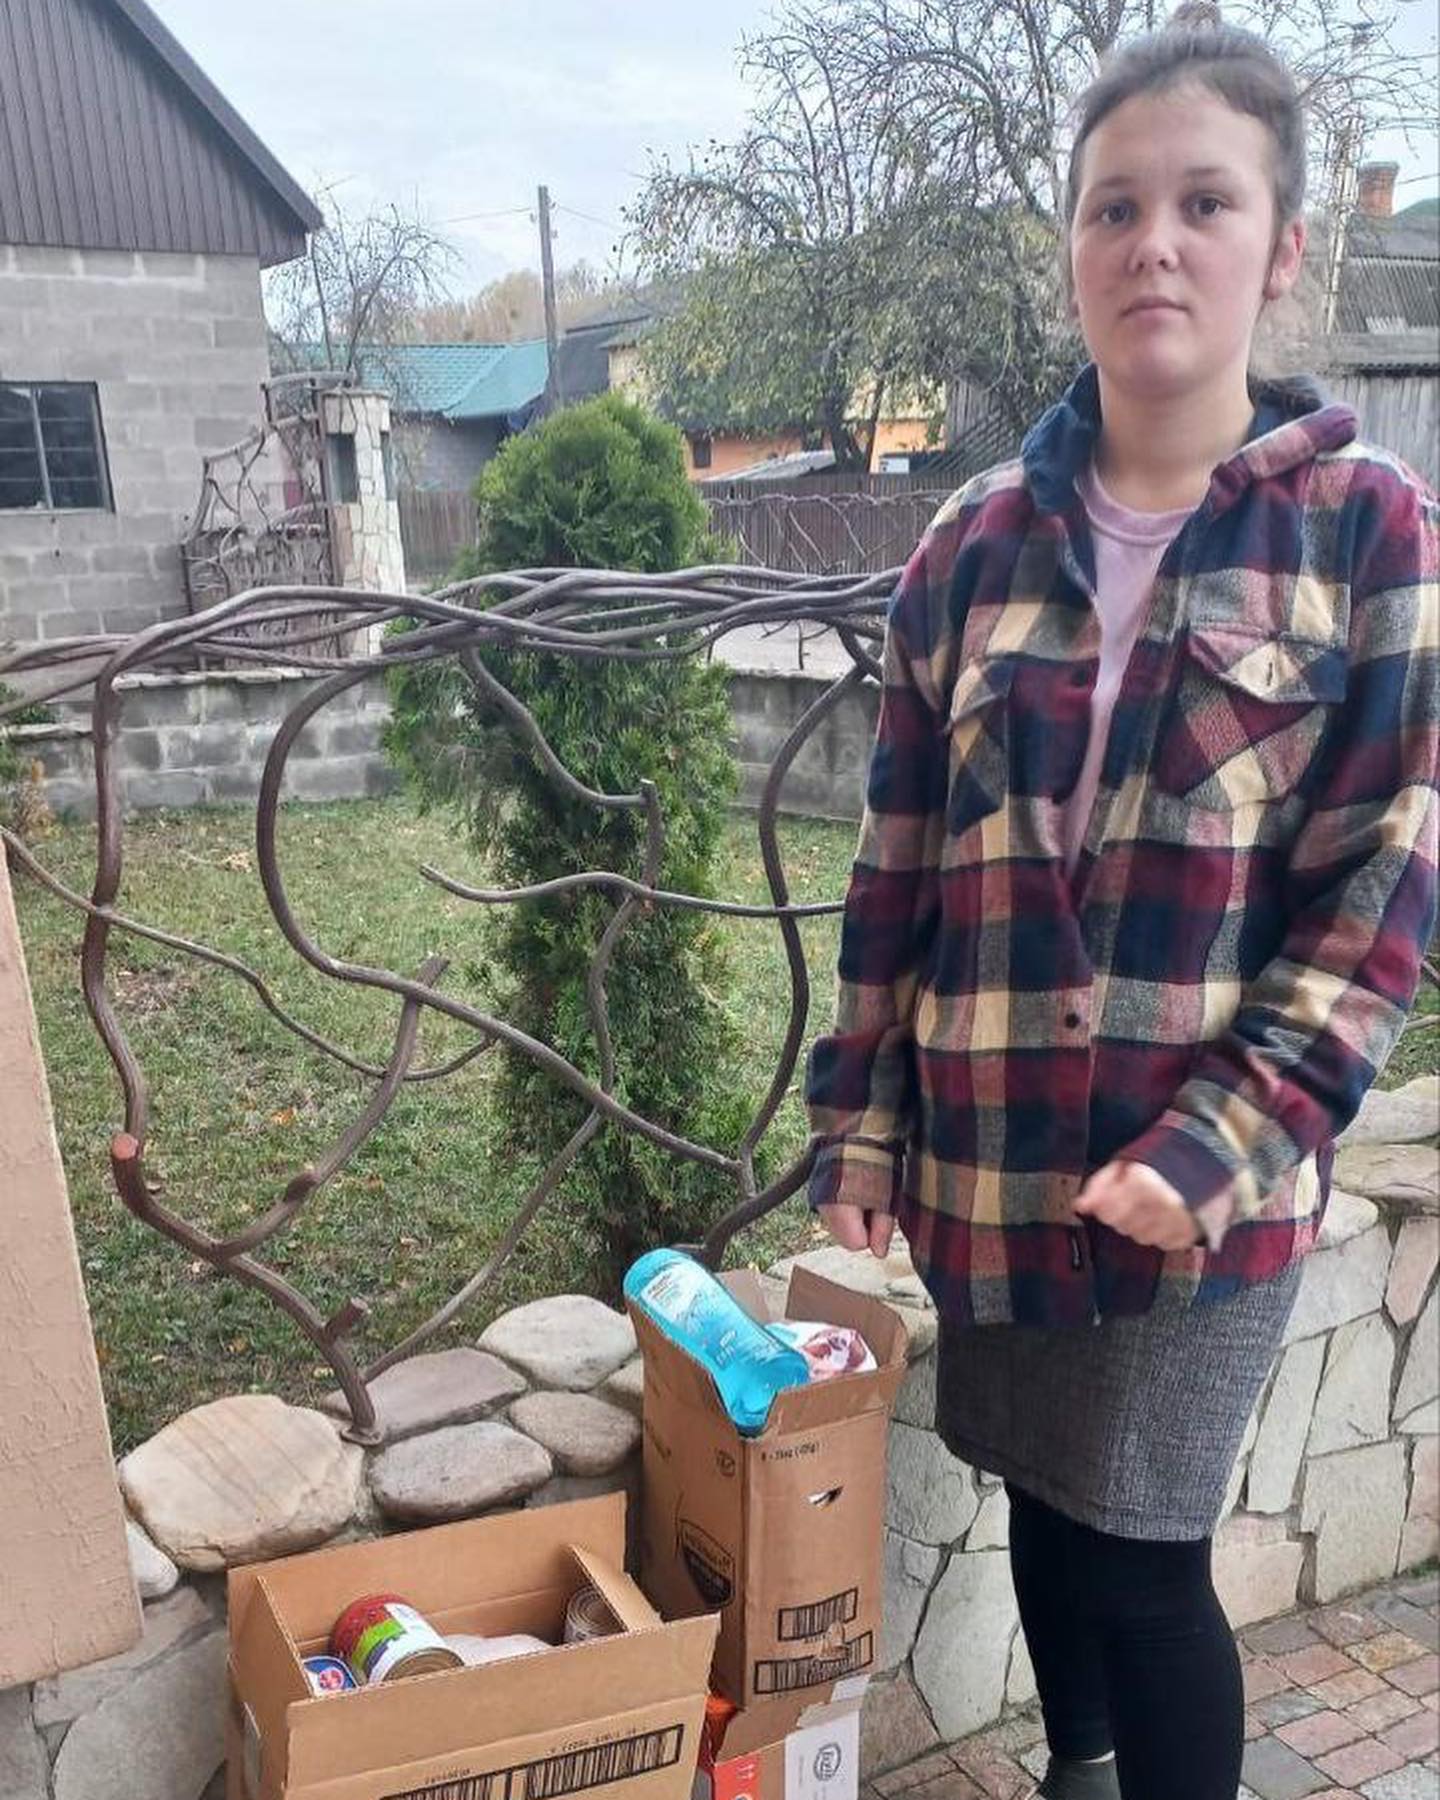 A girl standing next to boxes of food.